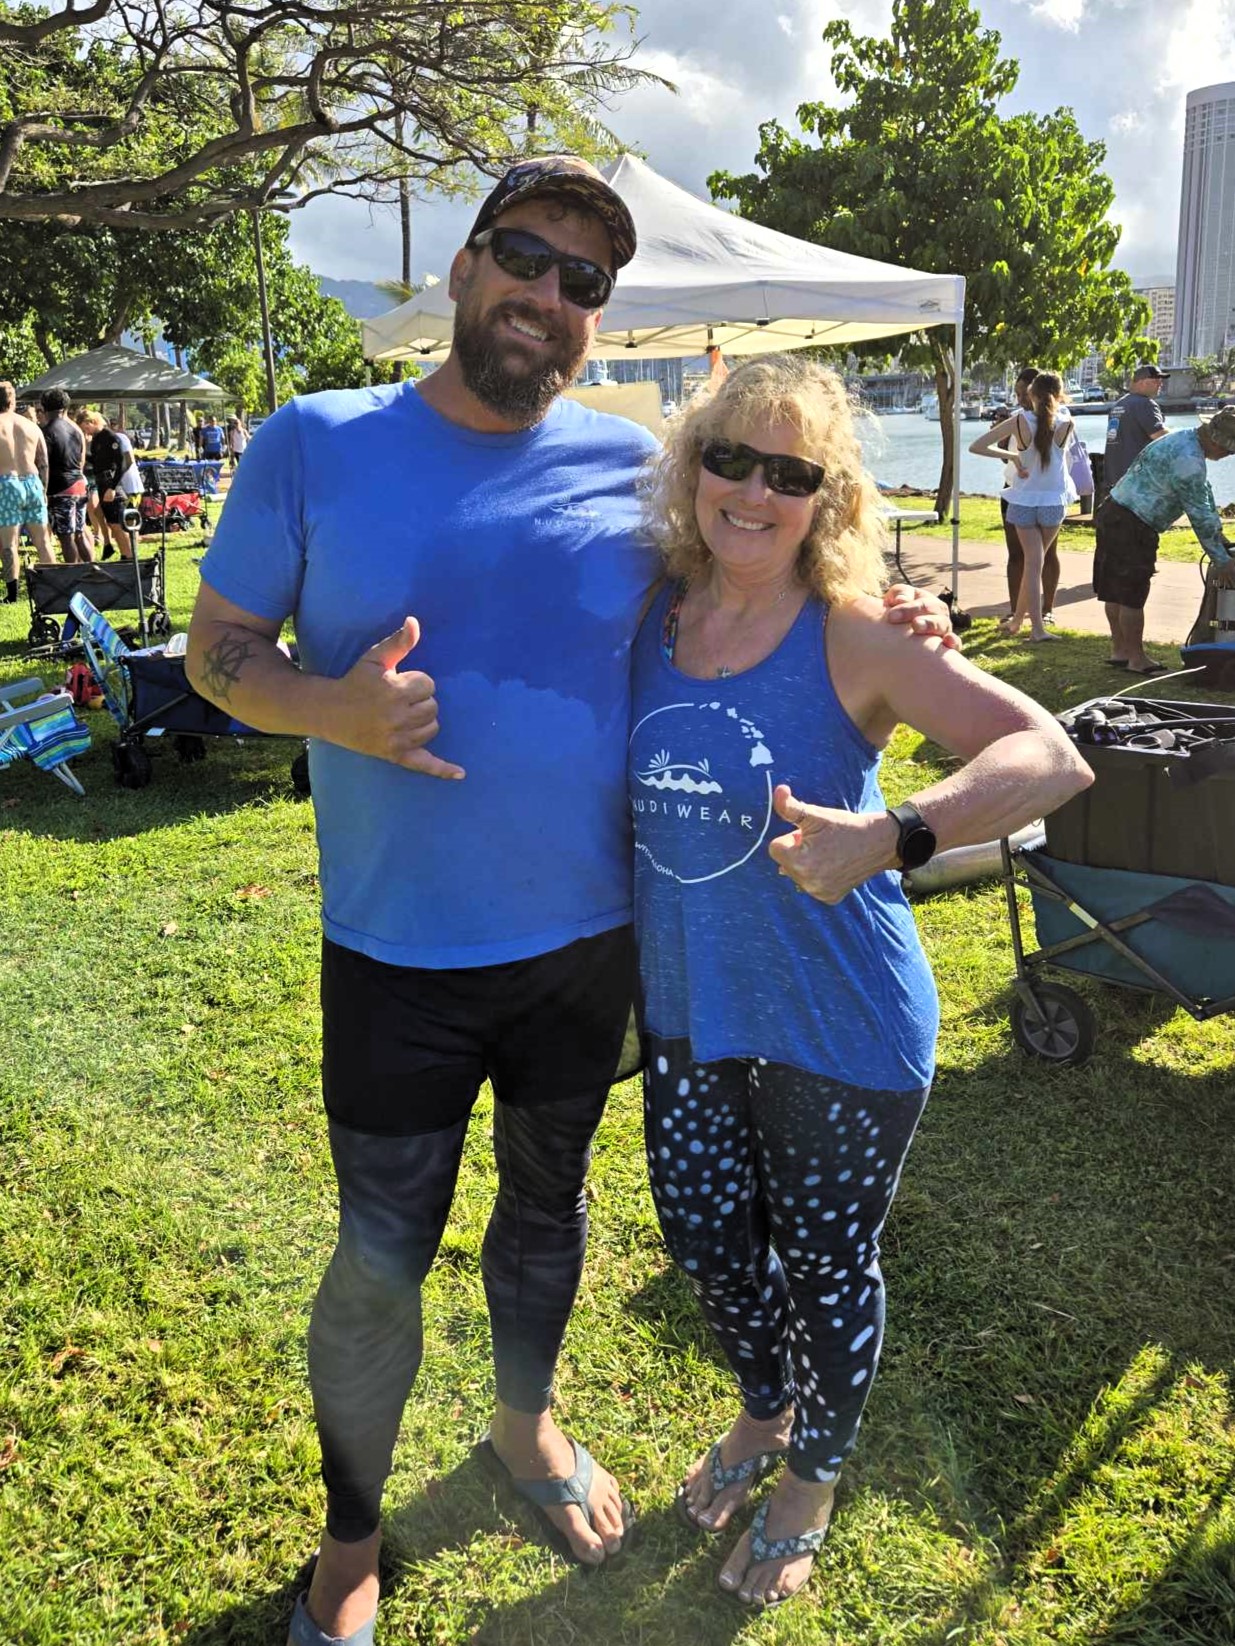 Nudi Wear Co-owner Ryan Scalf and volunteer at the Earth Day Cleanup at Magic Island